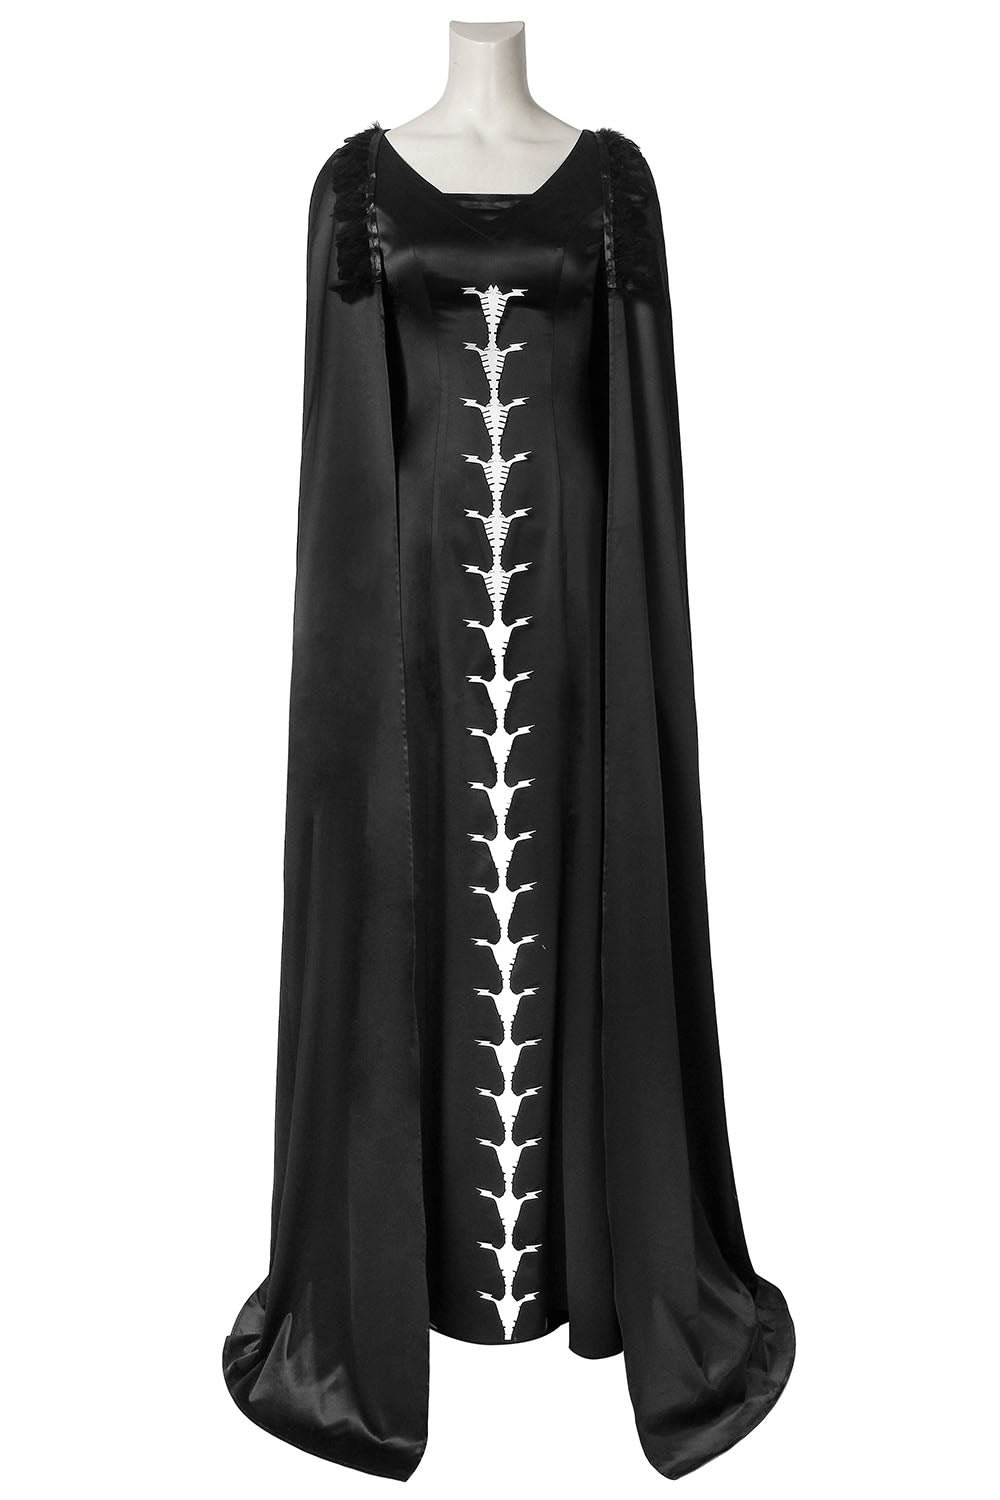 Maleficent: Mistress of Evil 2 Maleficent Cosplay Costume